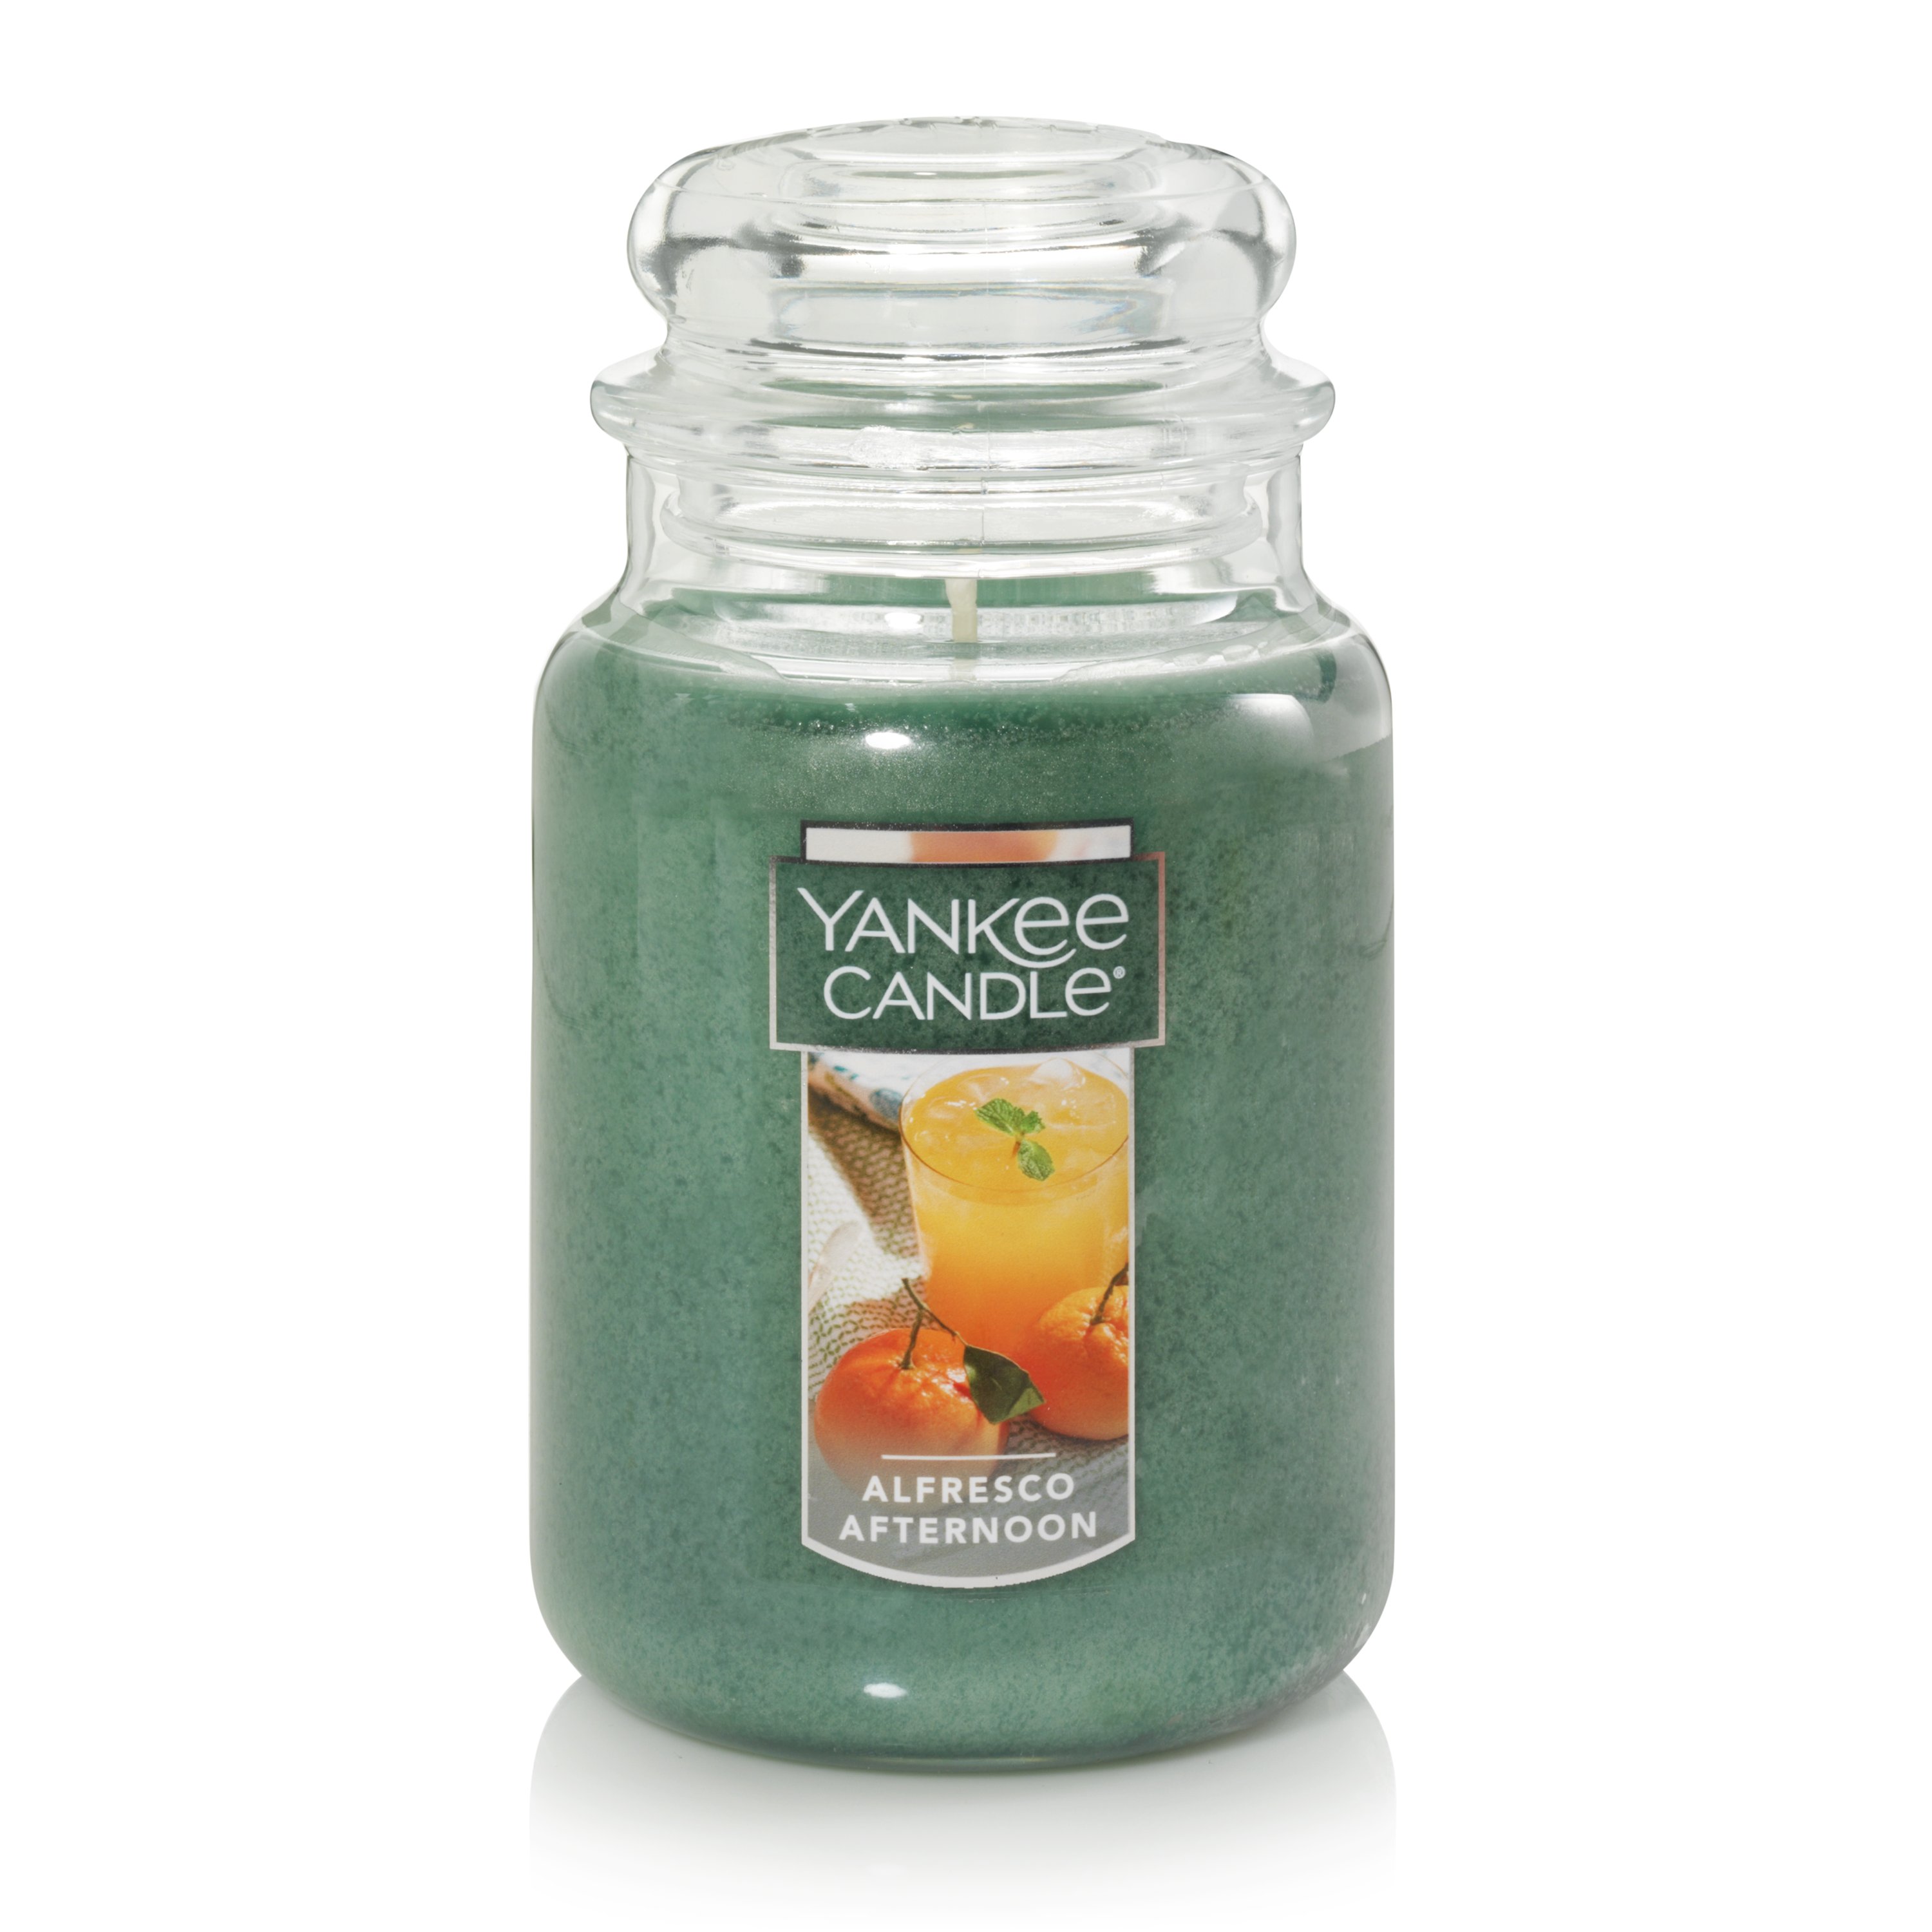 Yankee Candle Alfresco Afternoon Large Jar 22oz NEW Free Shipping Green 